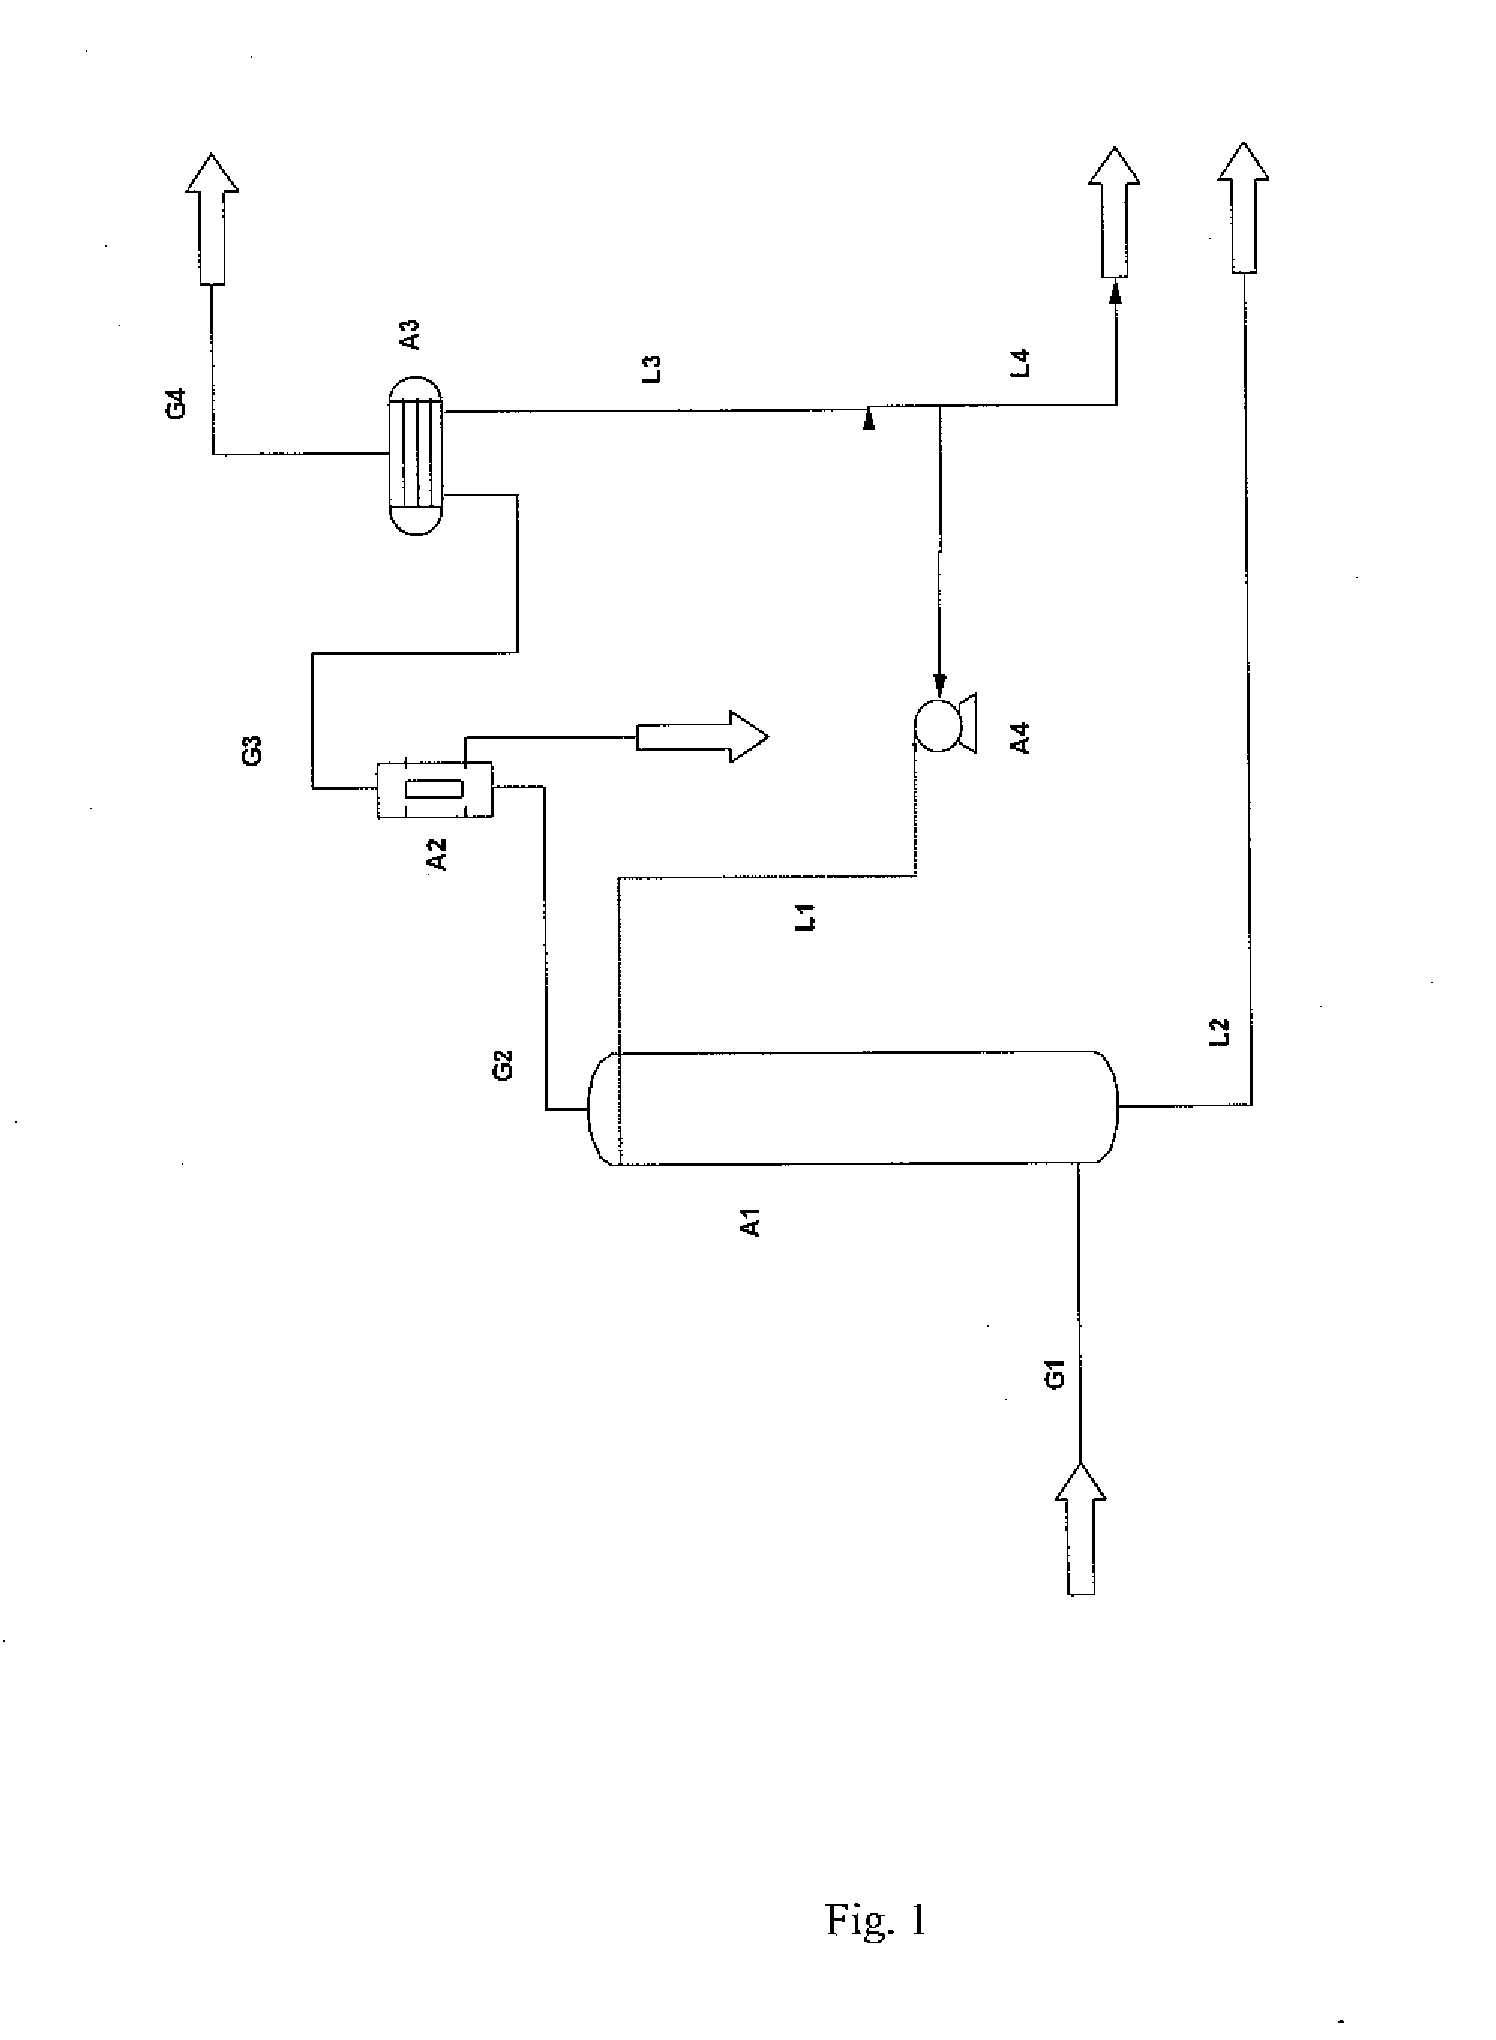 Method for purification of carbon dioxide using liquid carbon dioxide